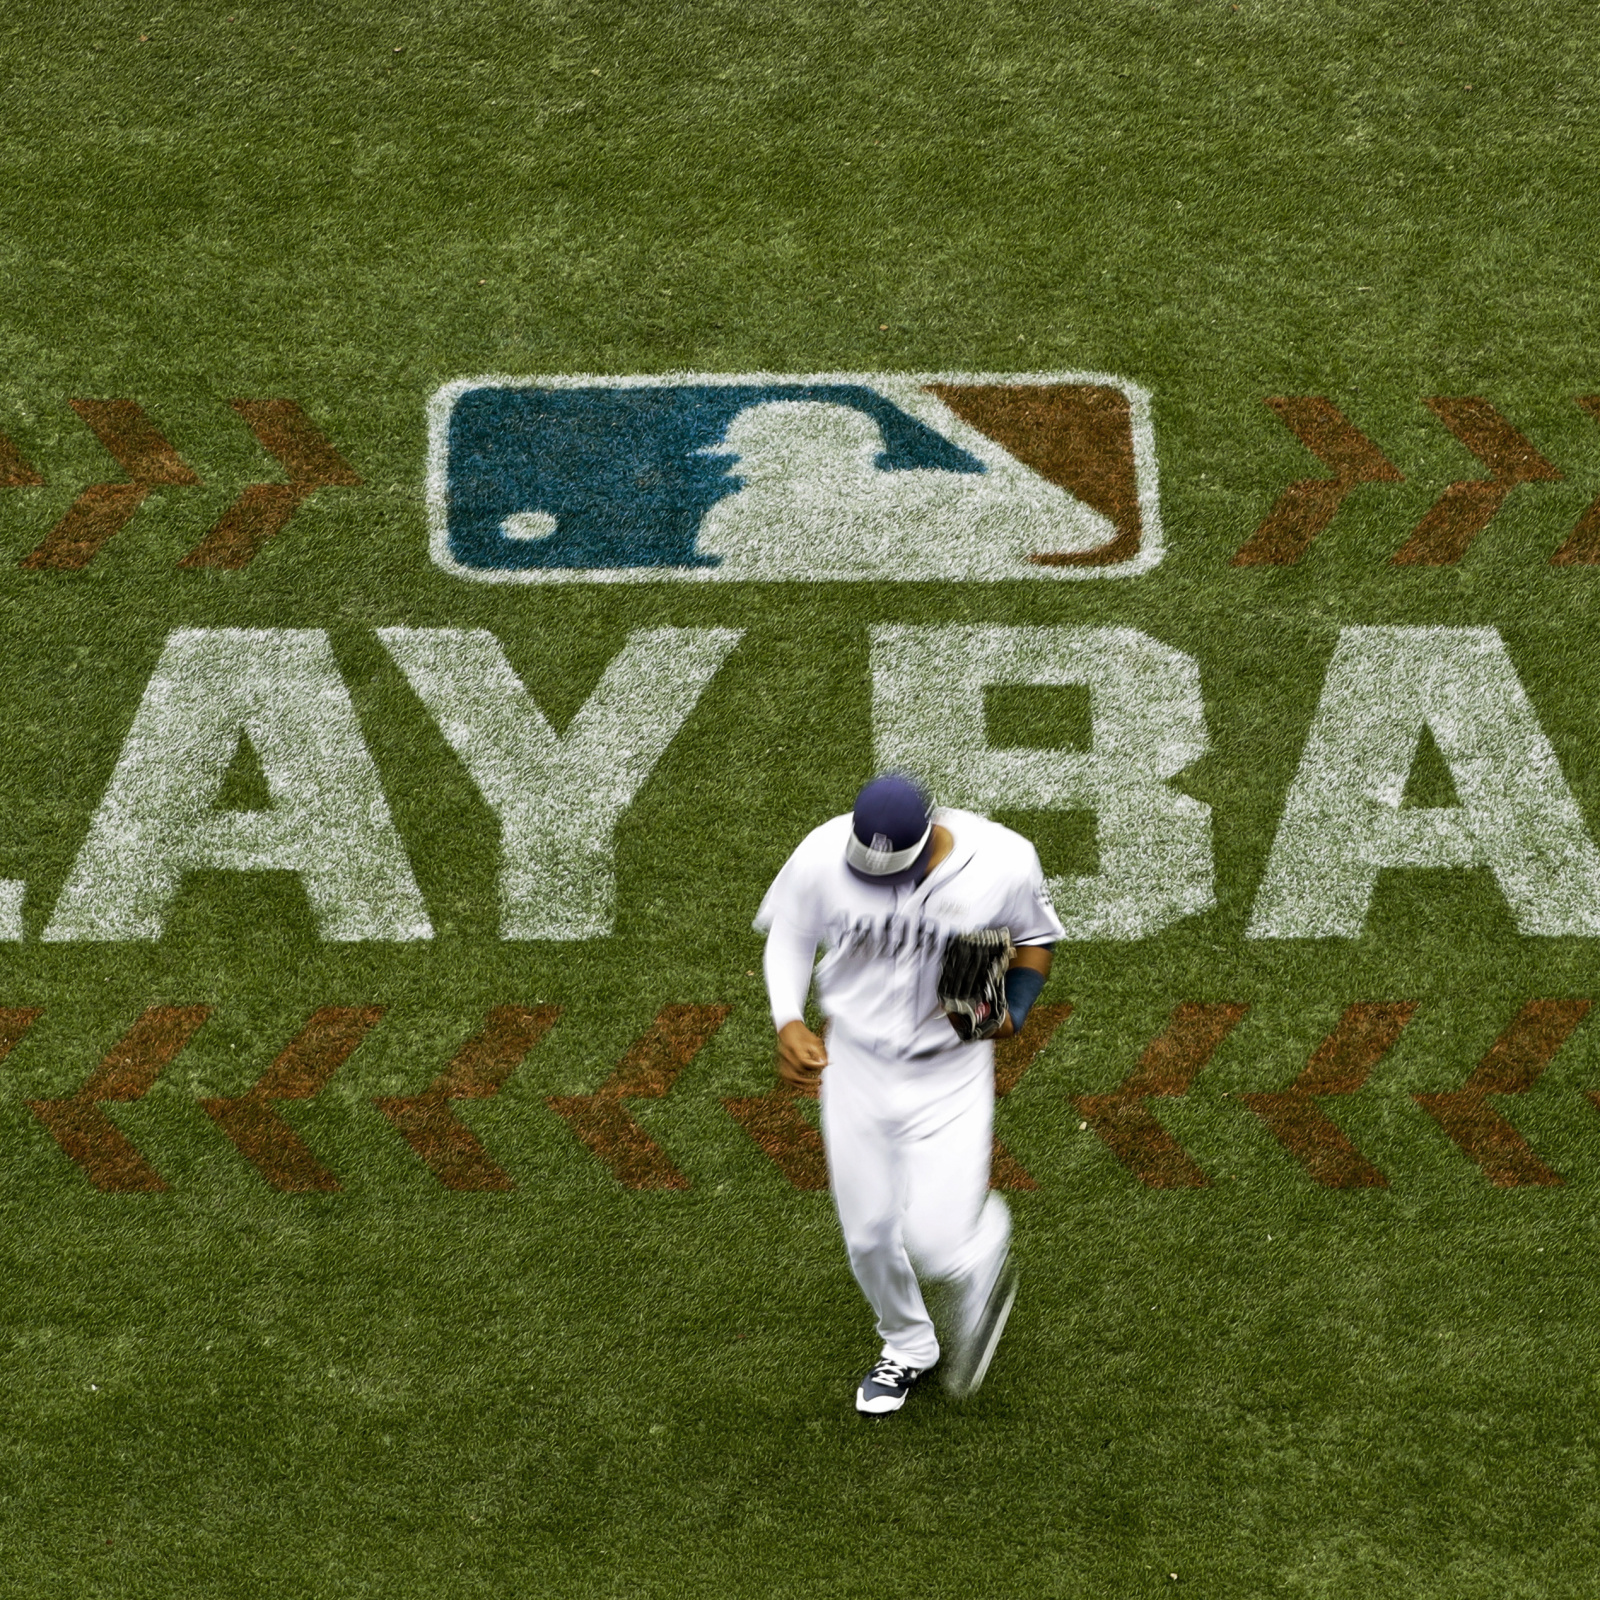 MLB Saves Itself at the Buzzer With New CBA and a 162-Game Season